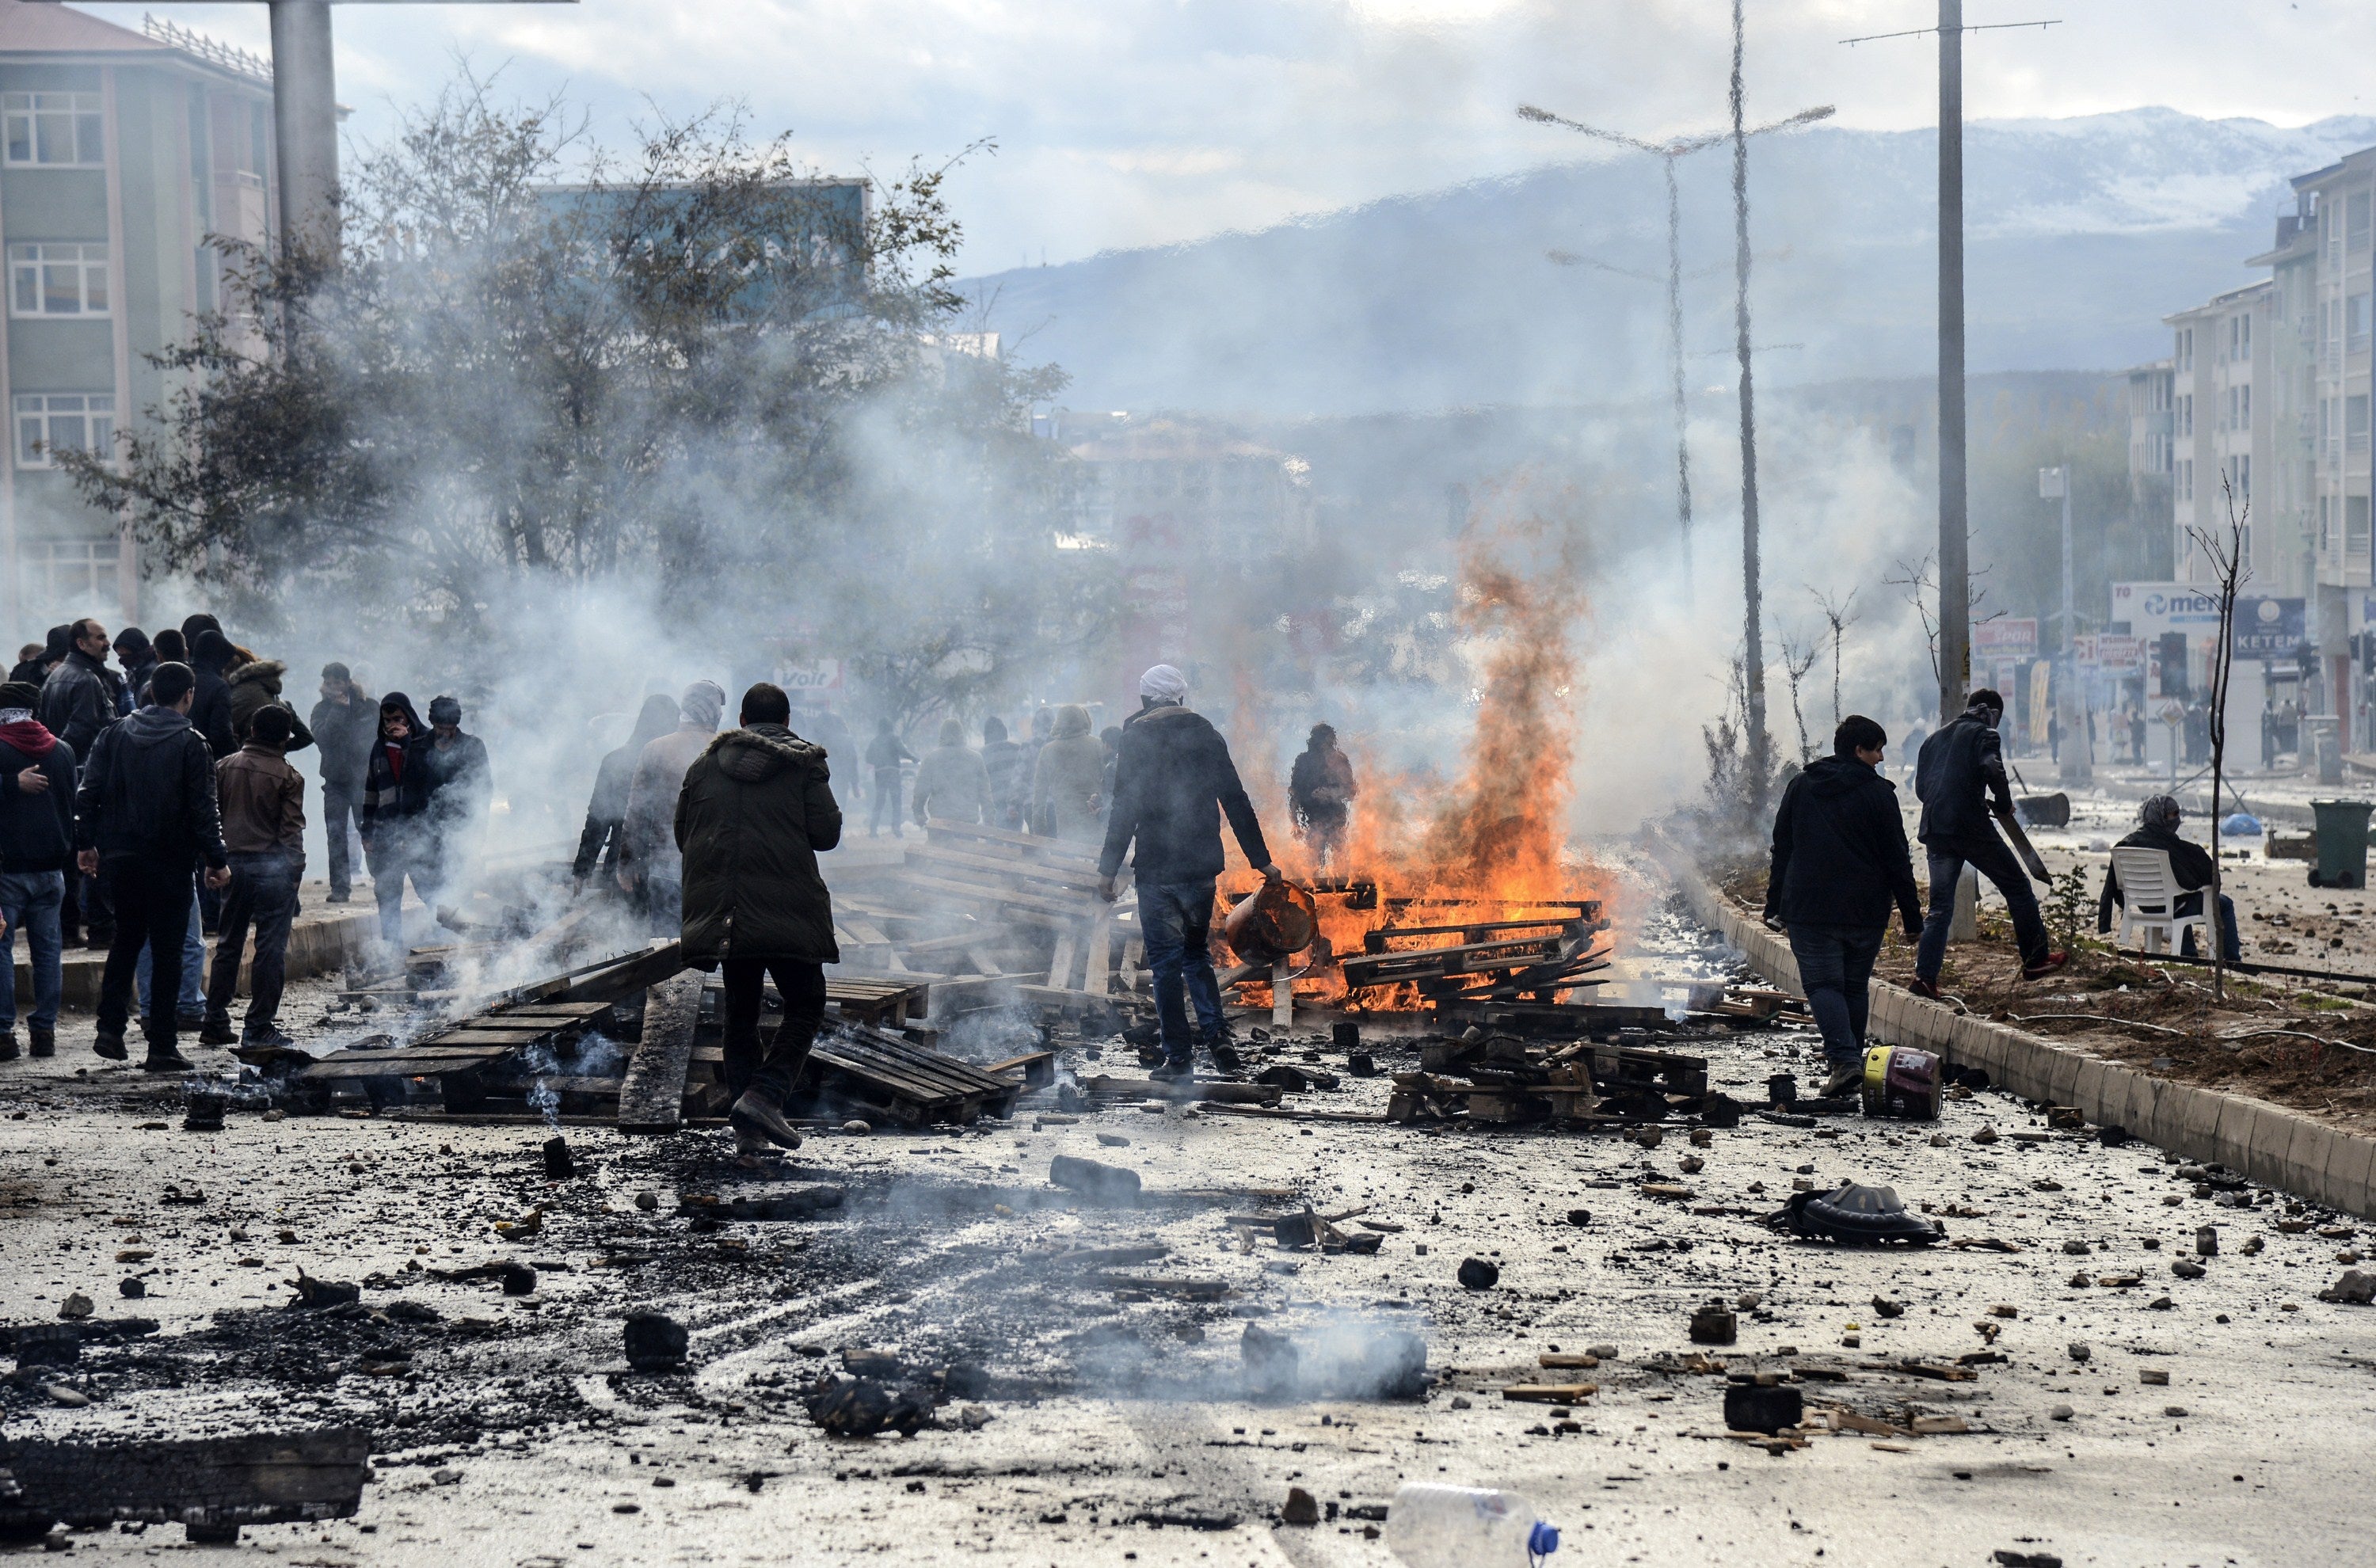 Unrest in Tunceli, after a demonstration by Kurdish protesters over the visit of a Turkish far-right nationalist leader to the city